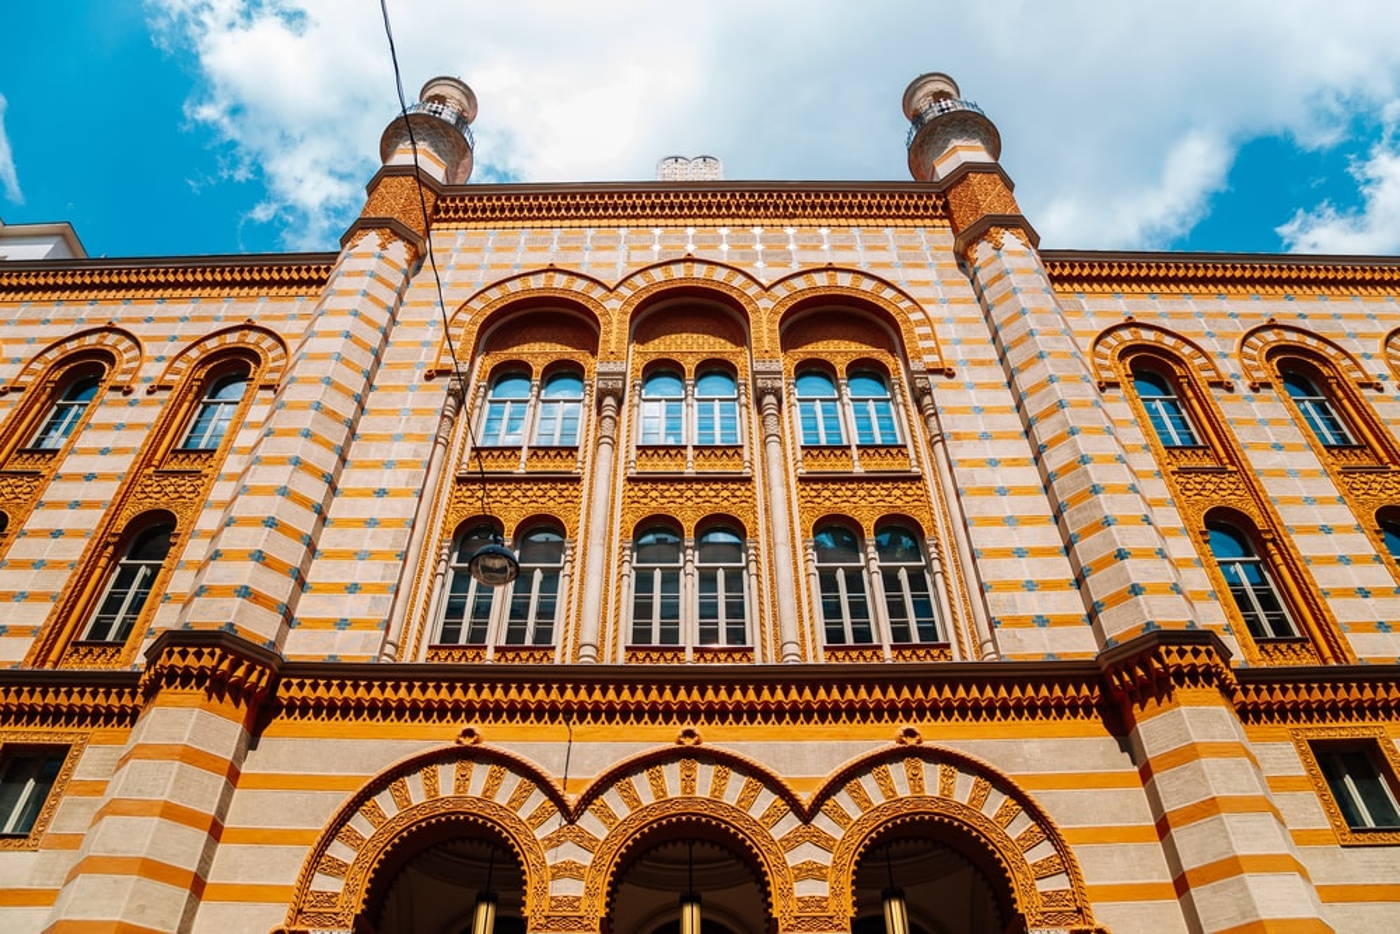 Rumbach street Synagogue in Budapest: excursions and tickets